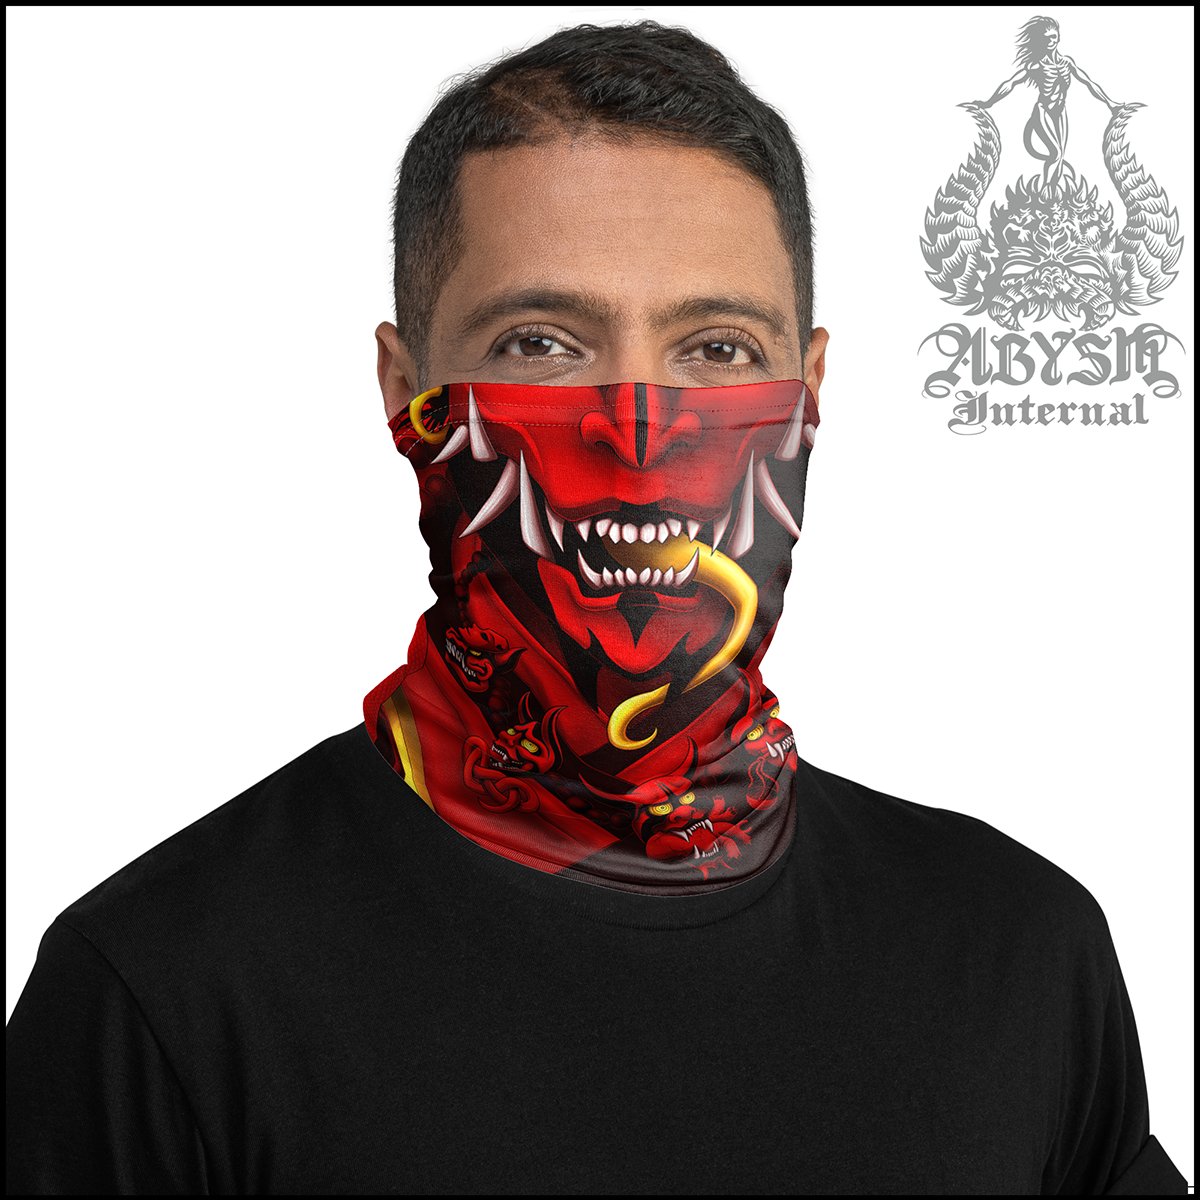 Oni Neck Gaiter, Hannya Face Mask, Japanese Demon Printed Head Covering, Bloody Gothic Street Outfit, Snake, Fangs, Headband - Red, Black - Abysm Internal